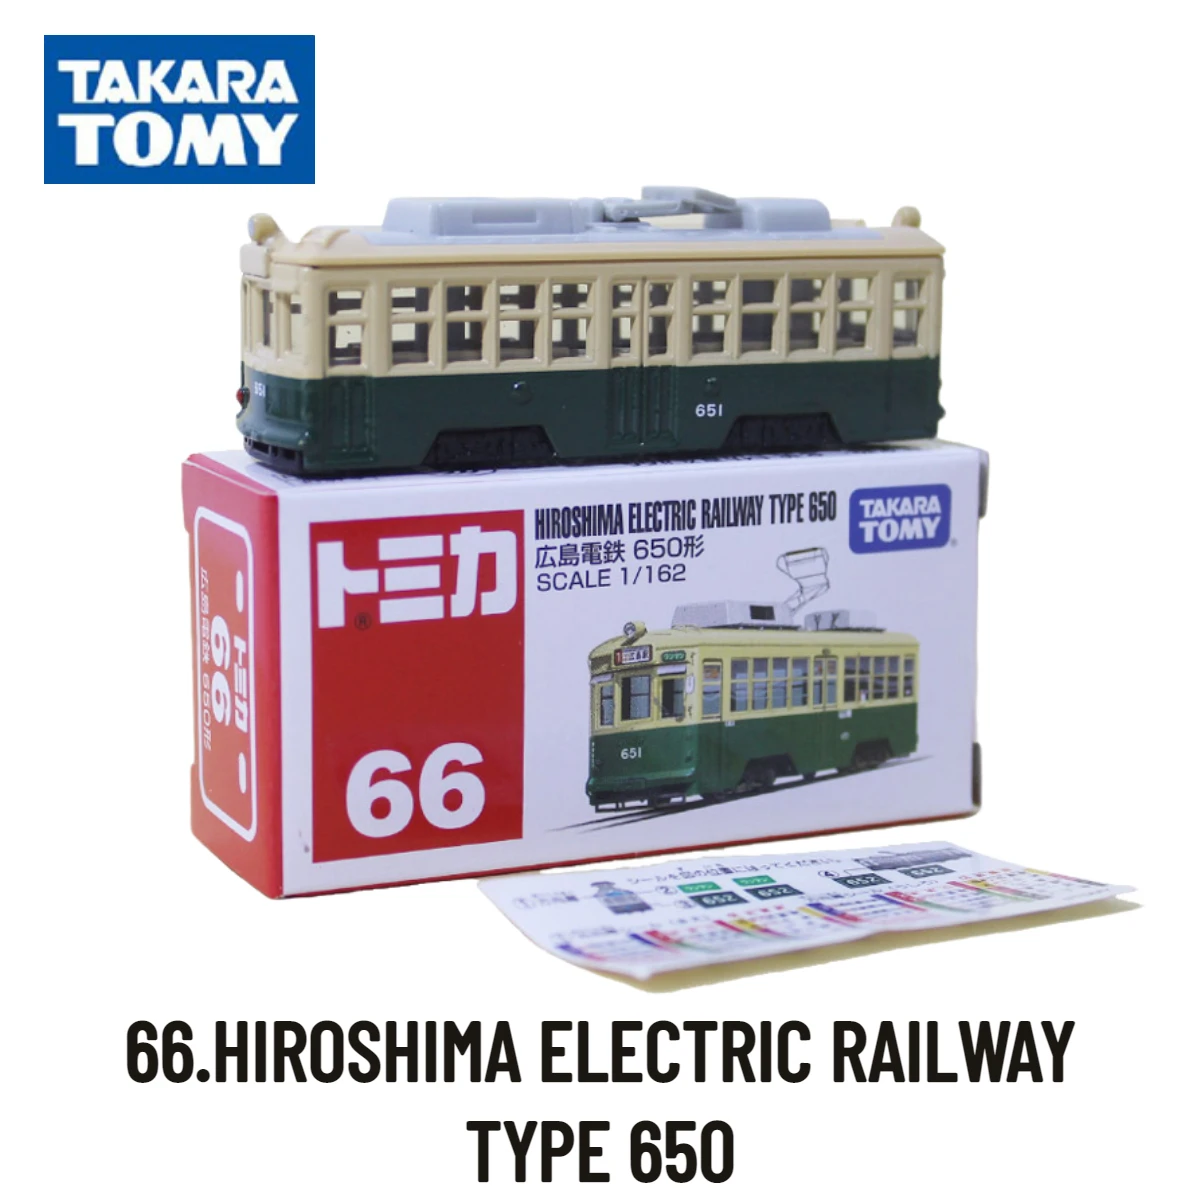 Takara Tomy Tomica Classic 61-90, 66.HIROSHIMA ELECTRIC RAILWAY Scale Car Model Replica Collection, Kids Xmas Gift Toys for Boys electric train toy set car railway and tracks steam locomotive engine diecast model simulation truck model toys for boys kids